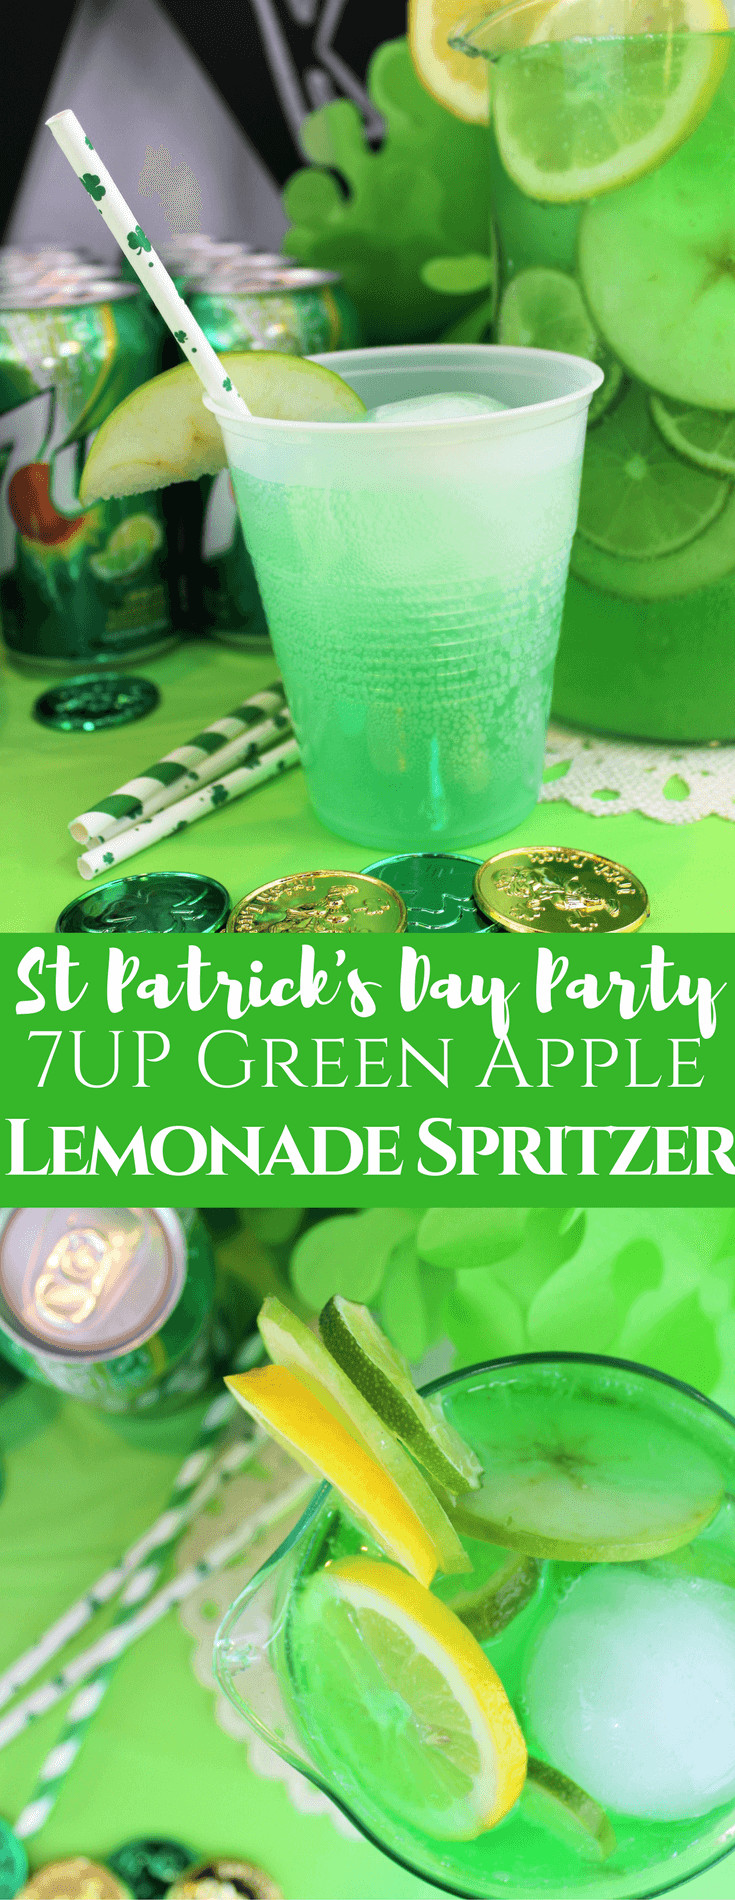 St Patrick's Day Party Menu
 St Patrick s Day Party Recipes